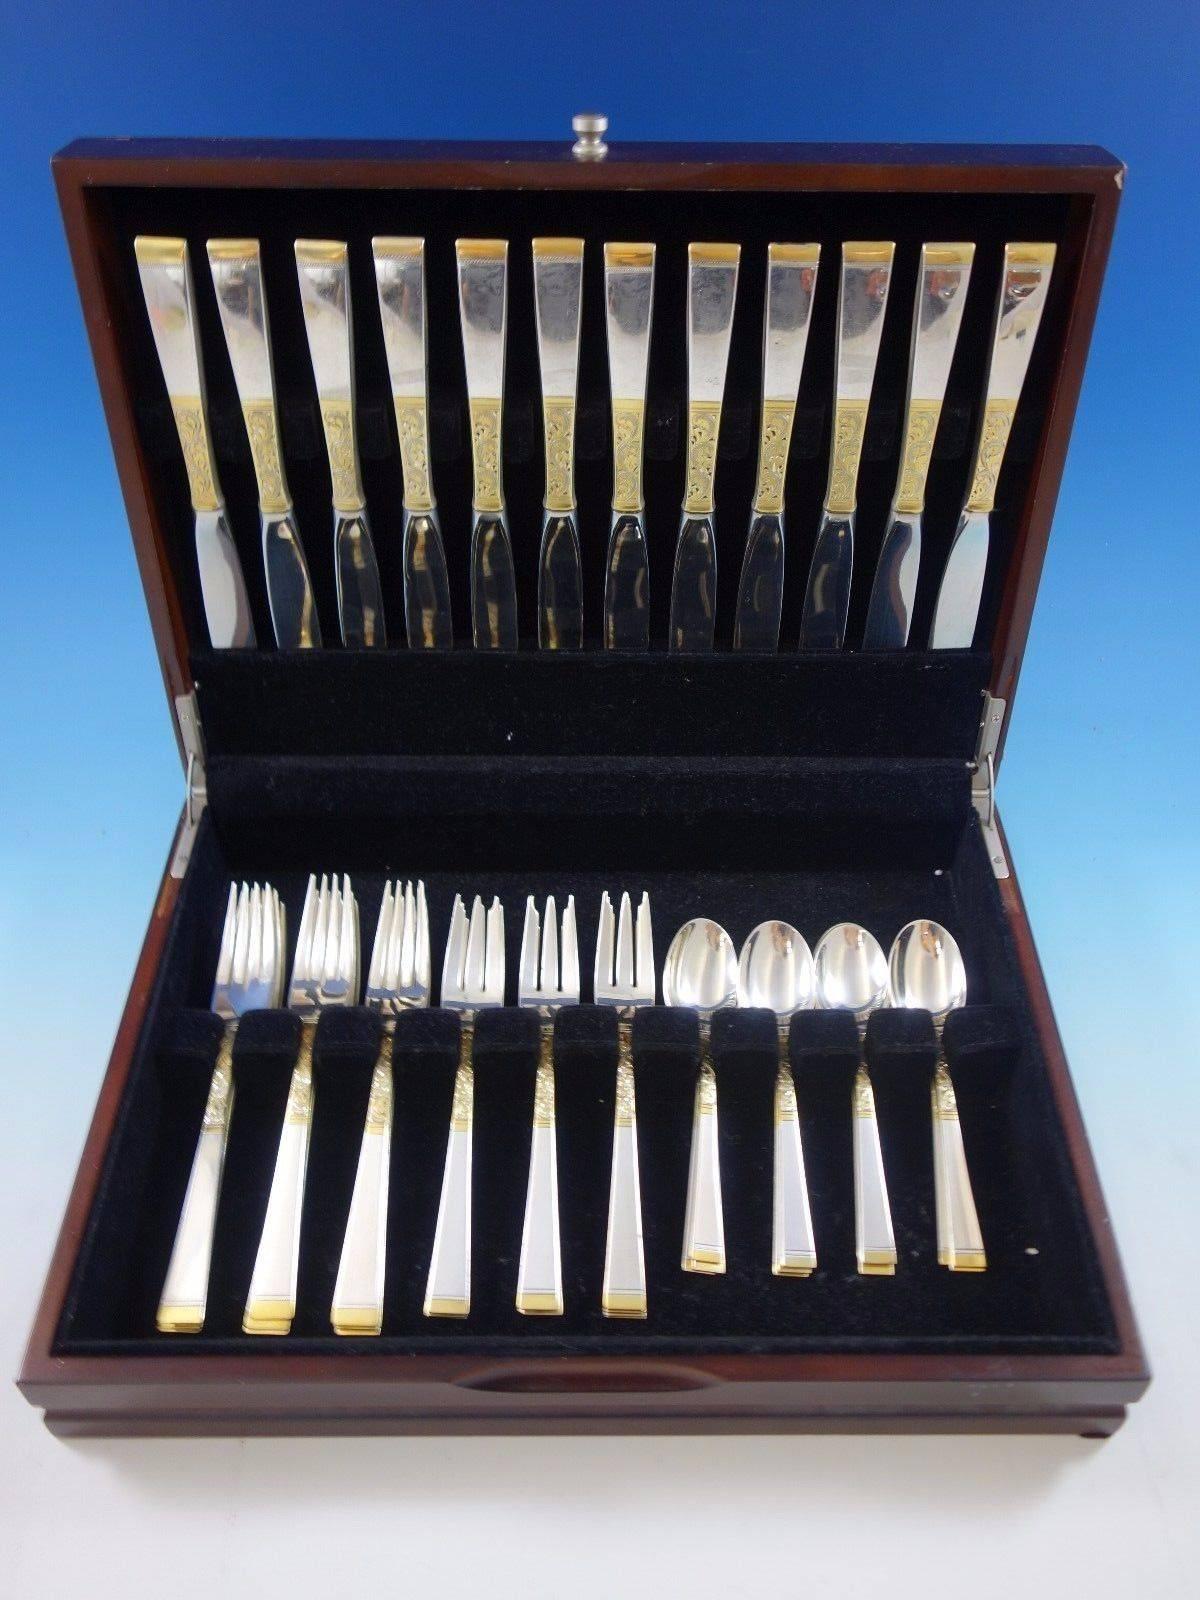 Golden scroll by Gorham sterling silver flatware set, 48 pieces. This set includes: 12 place knives, 9 1/8